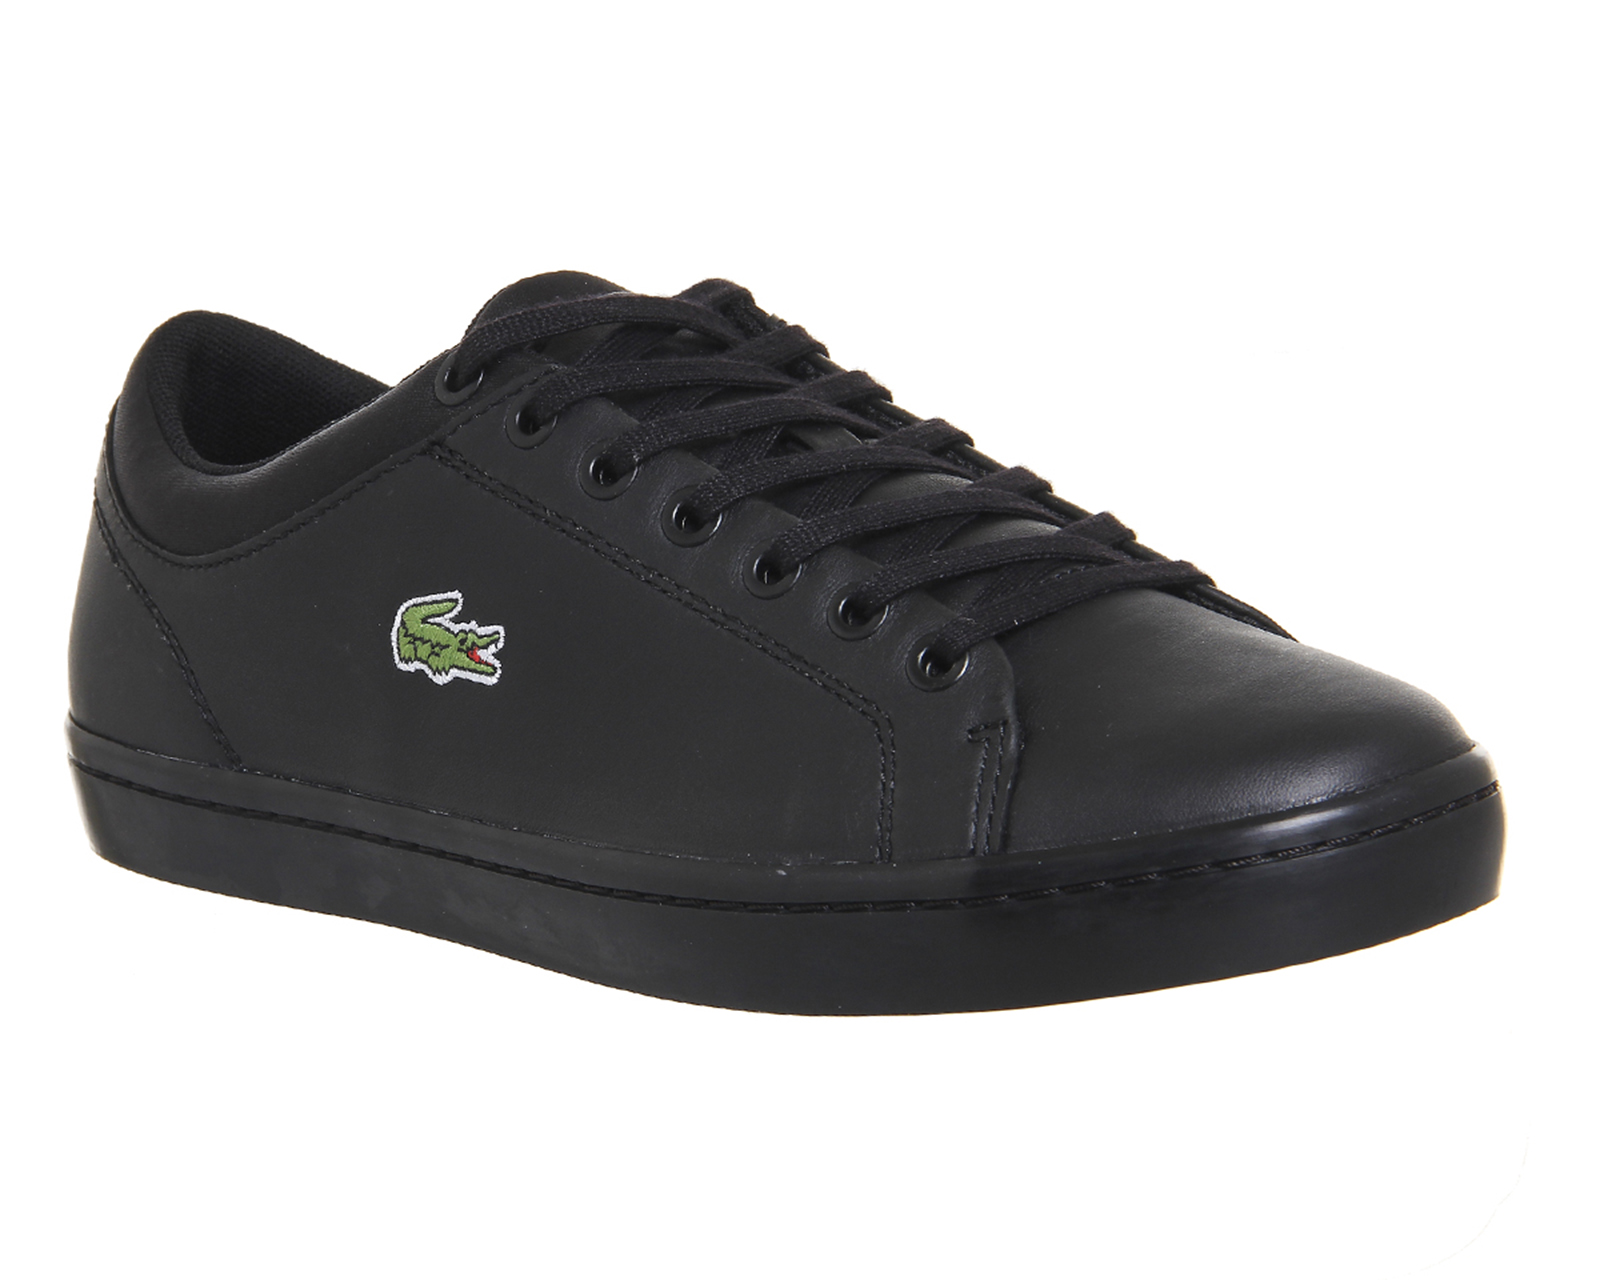 Lacoste Straightset Black Leather - His 